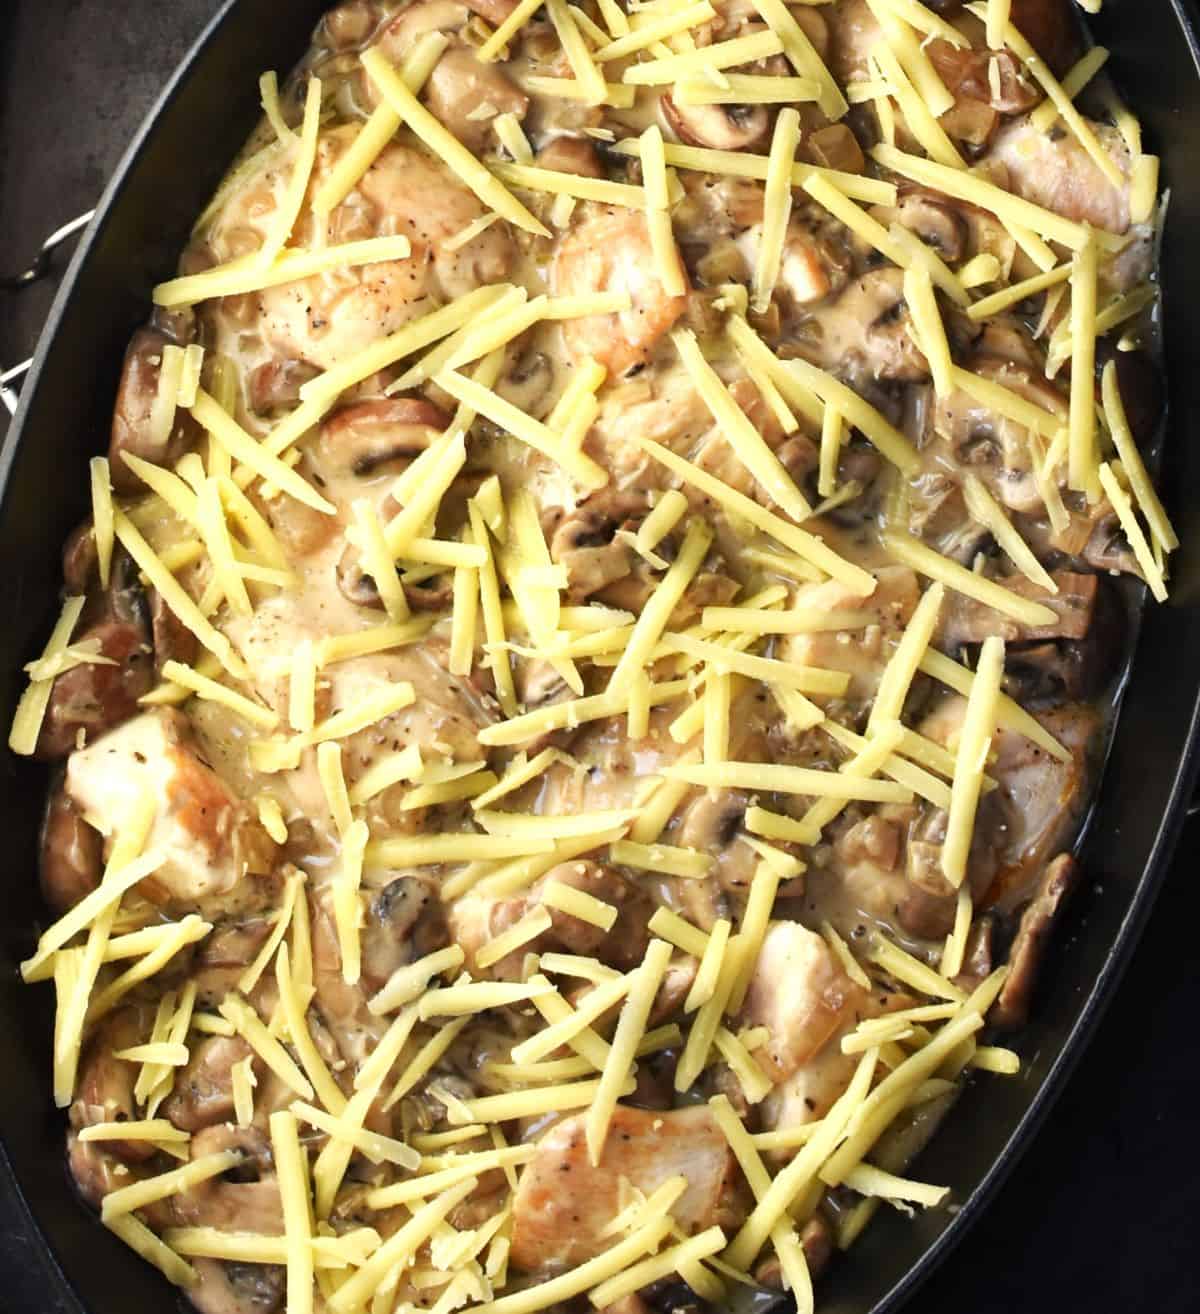 Mushroom chicken casserole in oval dish with grated cheese on top.